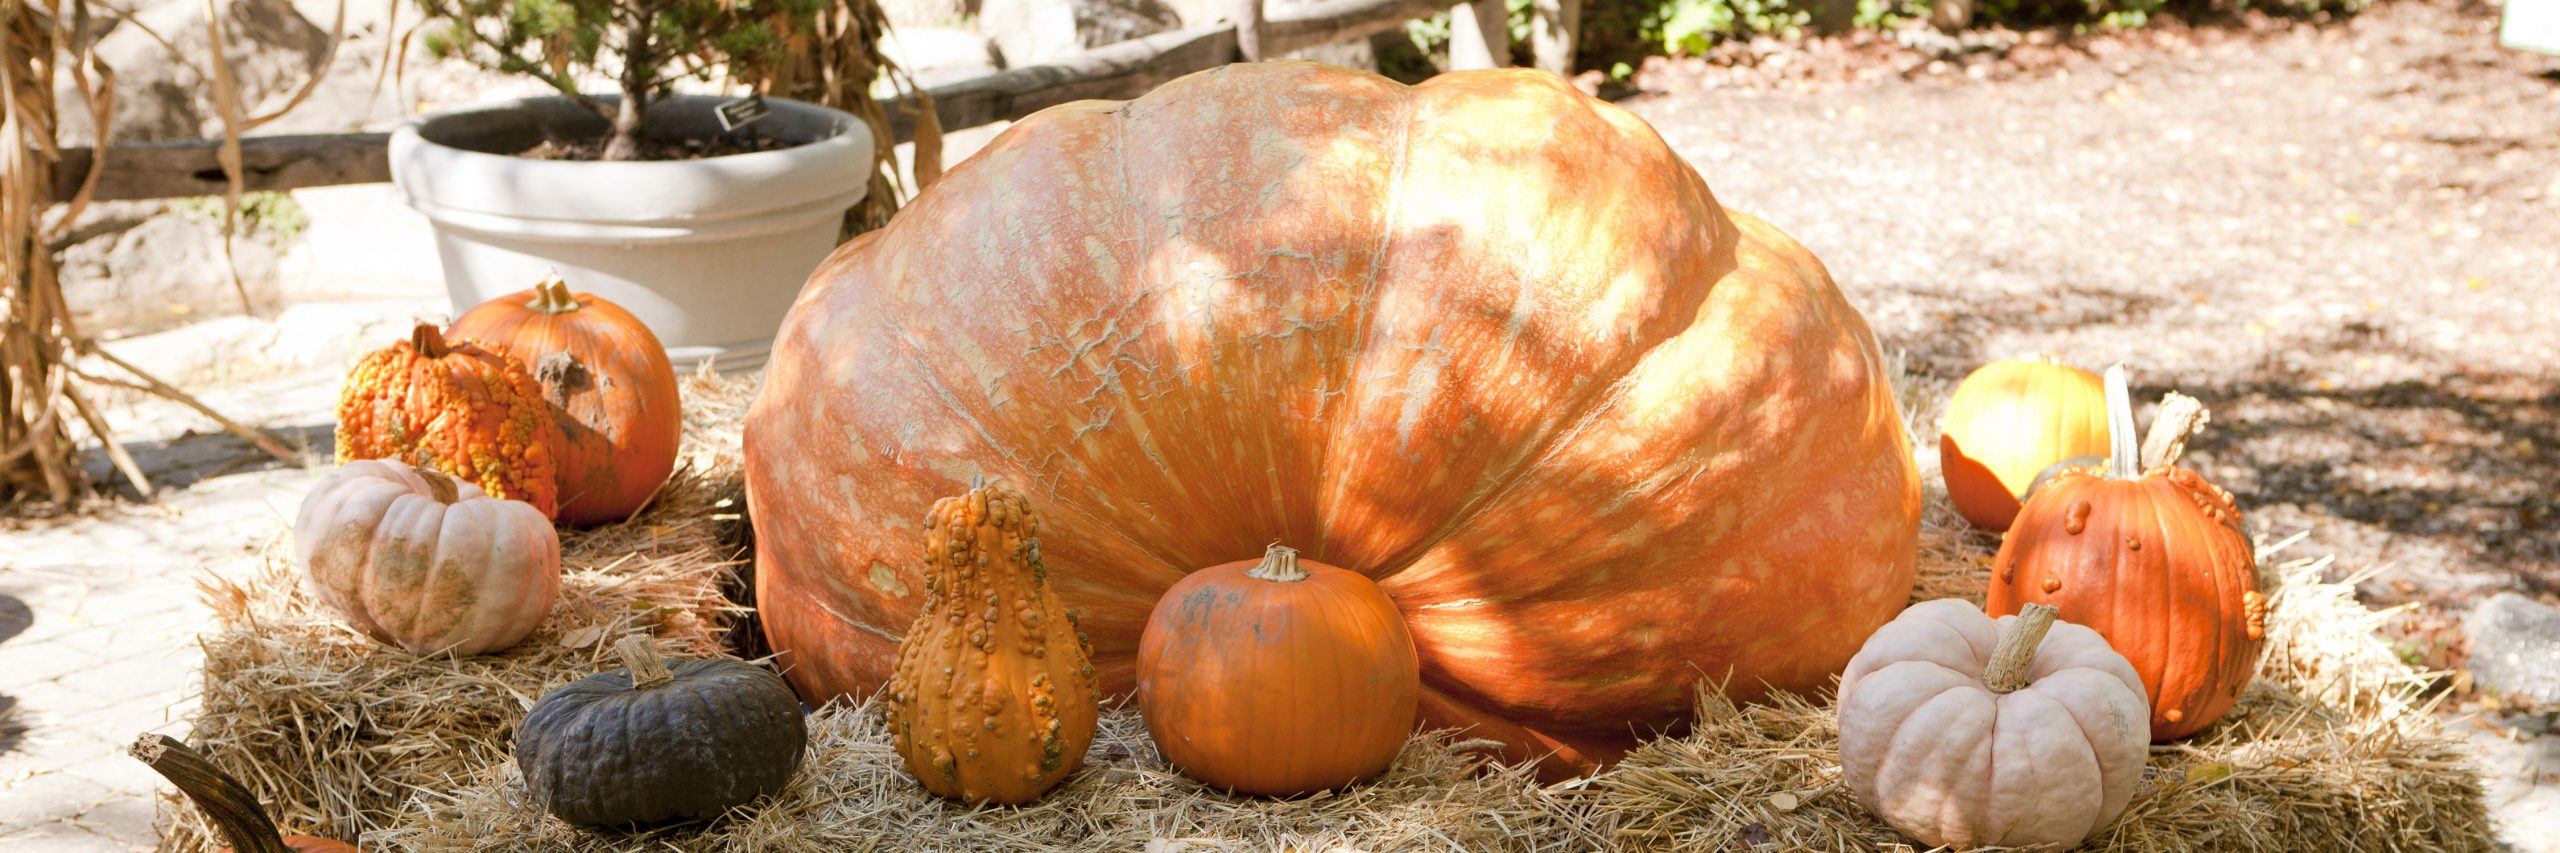 A giant pumpkin surrounded by smaller pumpkins and other gourds.